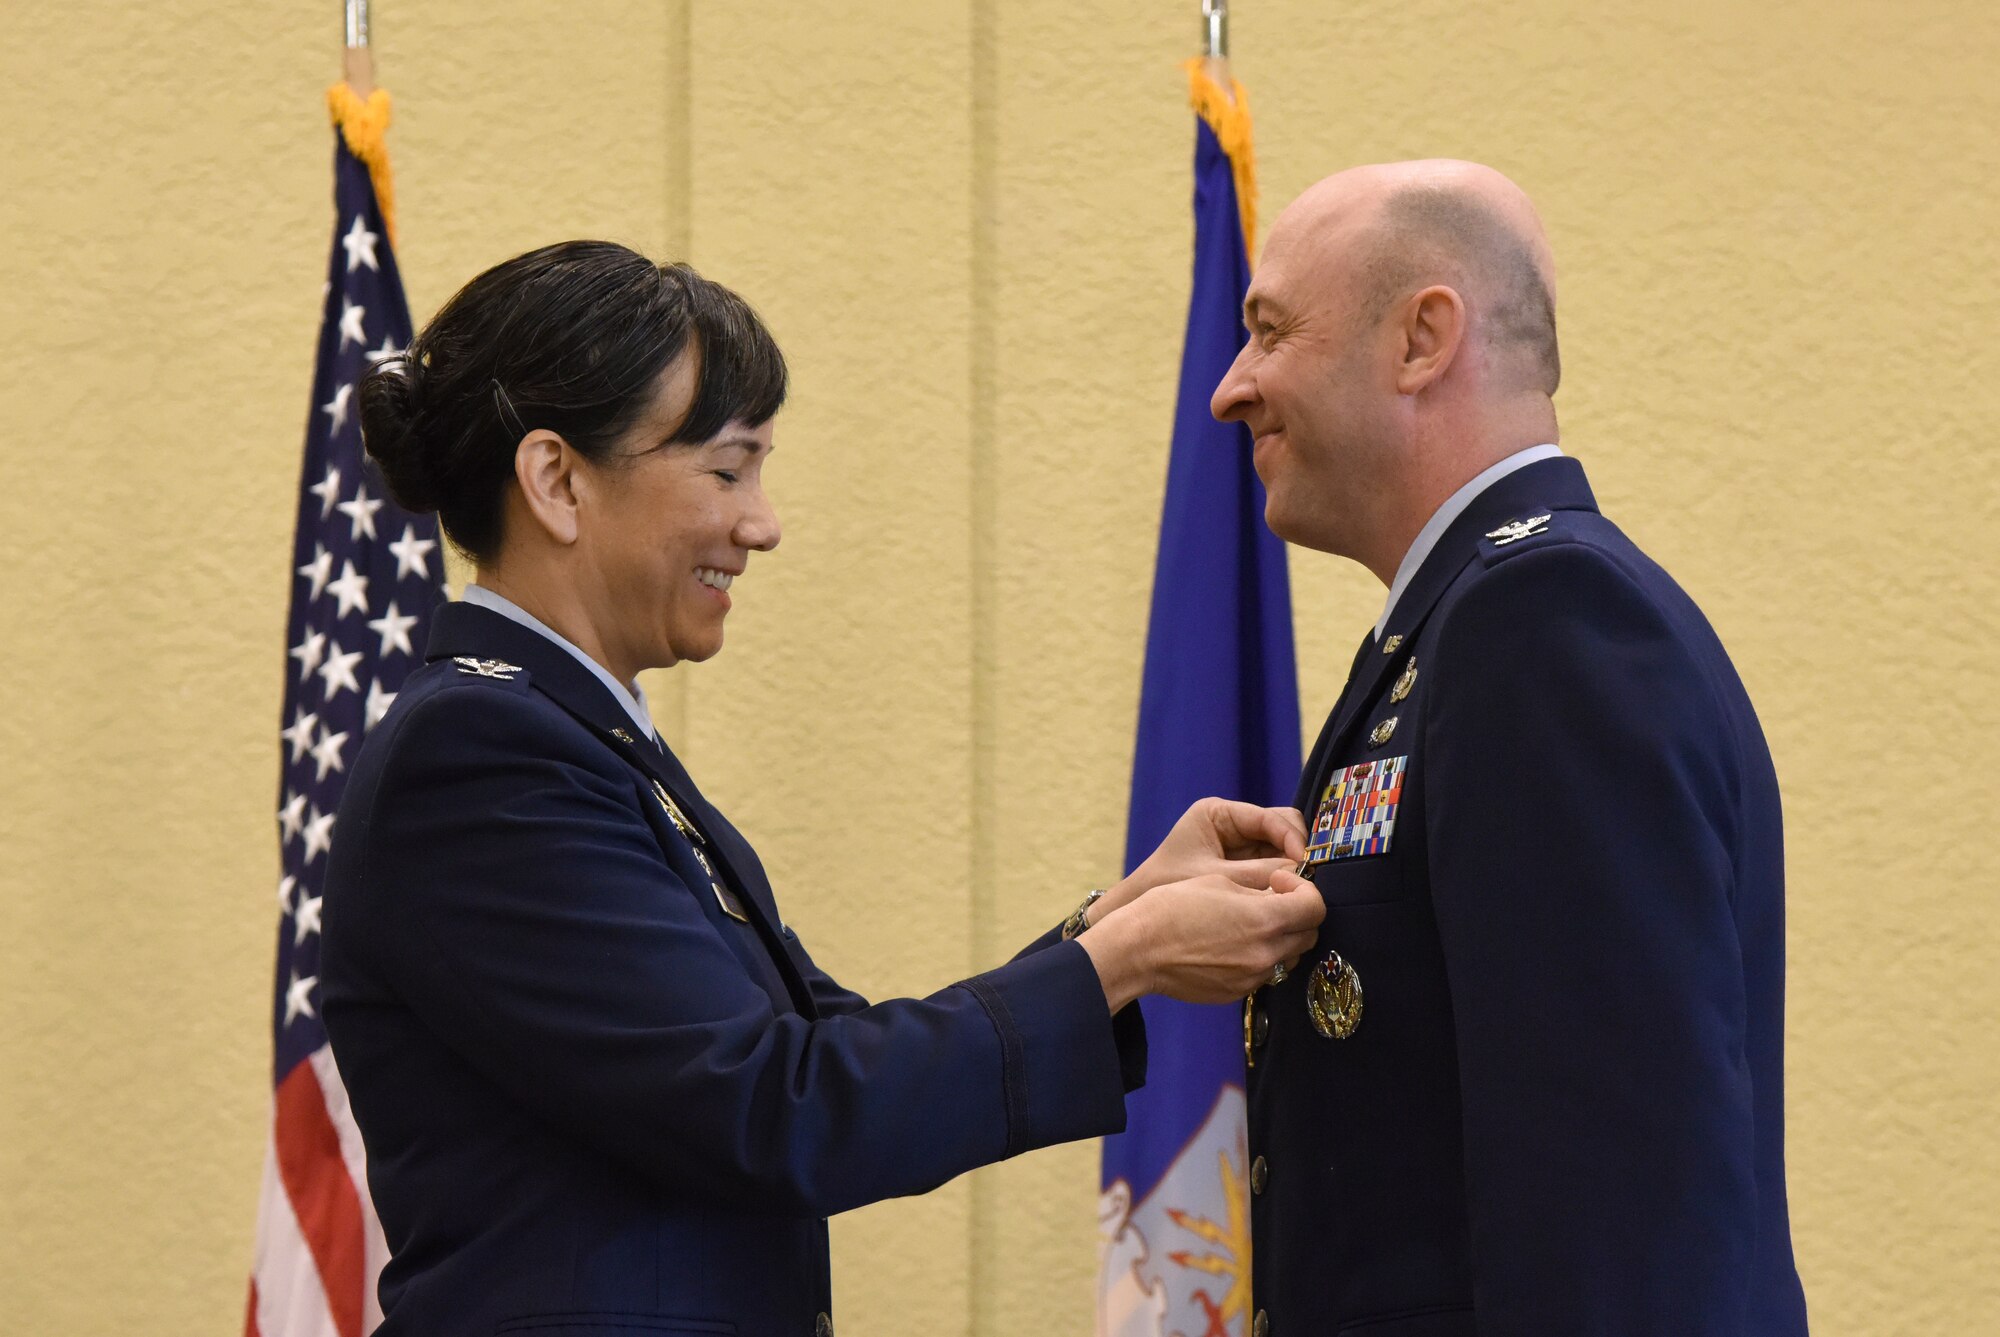 U.S. Air Force Col. Debra Lovette, 81st Training Wing commander, presents Col. Danny Davis, outgoing 81st Mission Support Group commander, with a Legion of Merit medal during the 81st MSG change of command ceremony in the Bay Breeze Event Center at Keesler Air Force Base, Mississippi, July 19, 2018. Davis relinquished command of the 81st MSG and will be assigned to 2nd Air Force until he retires in September 2018, with more than 24 years of military service. (U.S. Air Force photo by Kemberly Groue)